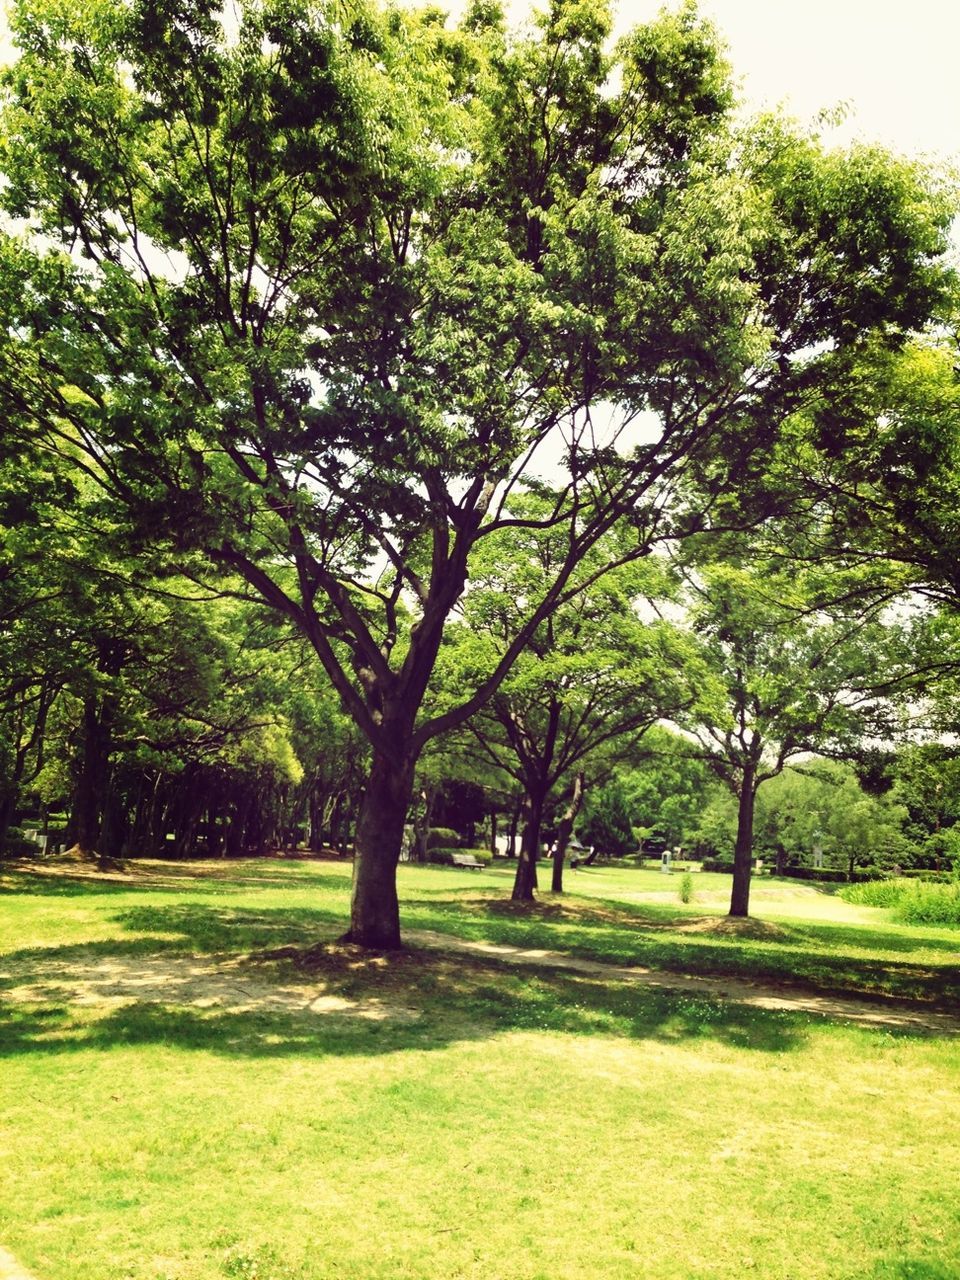 tree, green color, grass, growth, tranquility, nature, tranquil scene, tree trunk, beauty in nature, park - man made space, grassy, lush foliage, branch, green, scenics, field, landscape, park, lawn, day